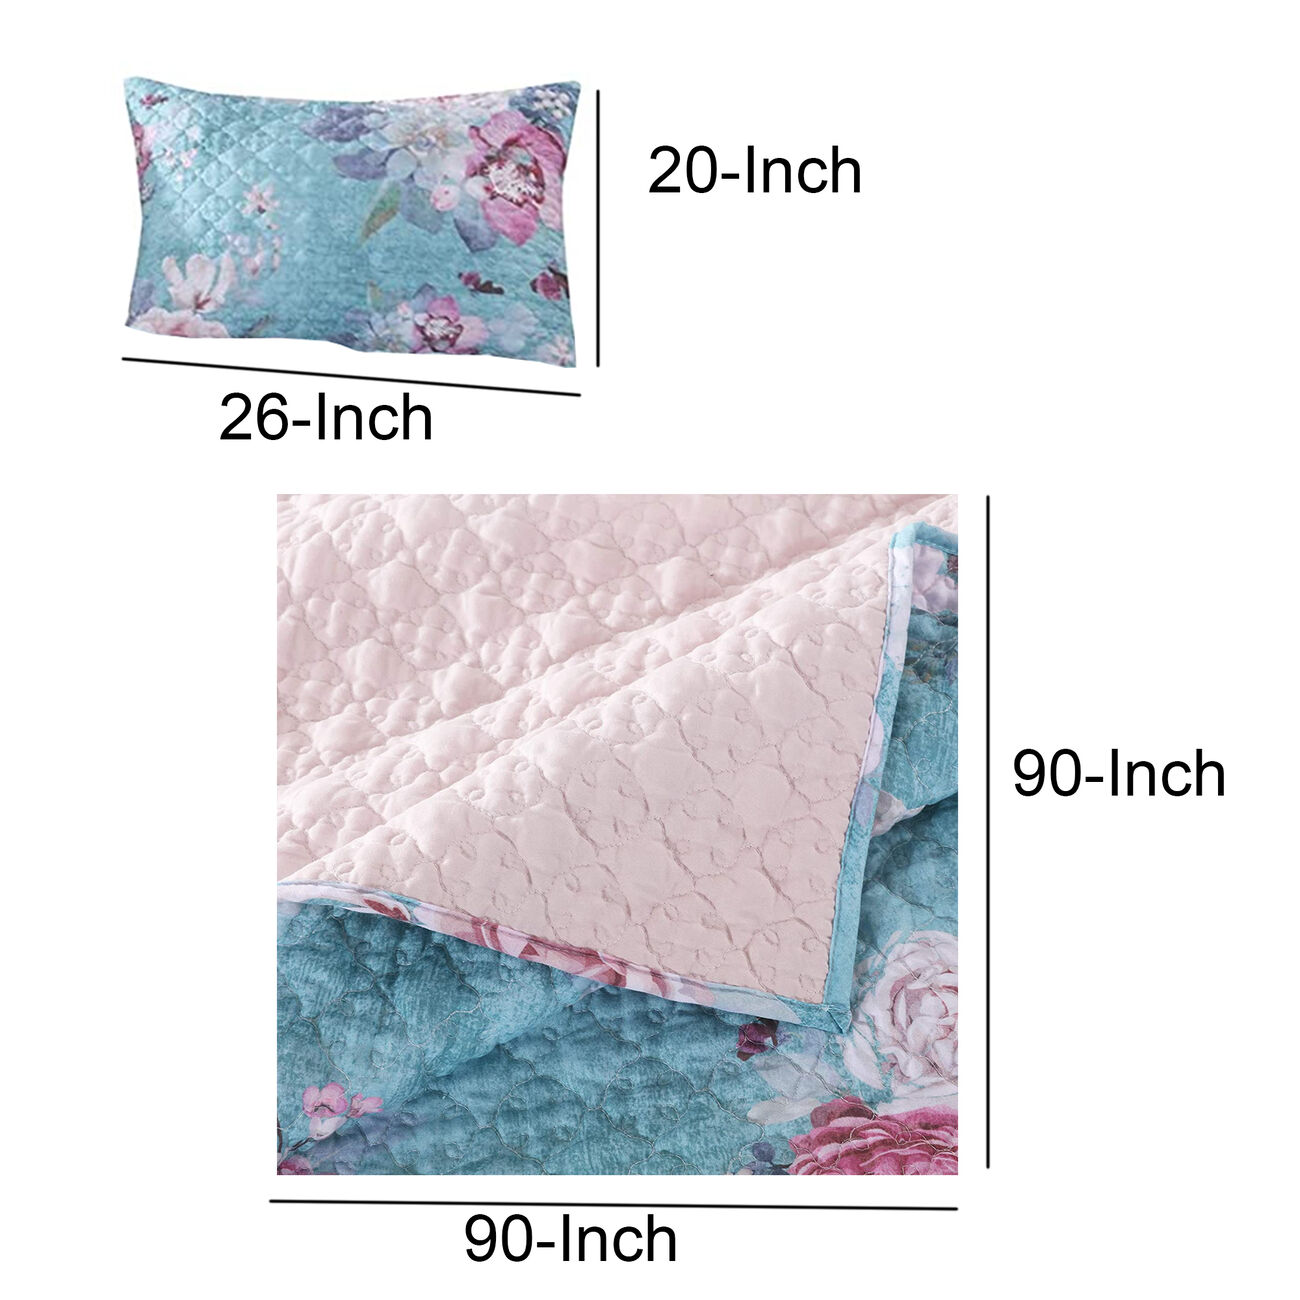 3 Piece Full Size Quilt Set with Floral Print, Blue and White